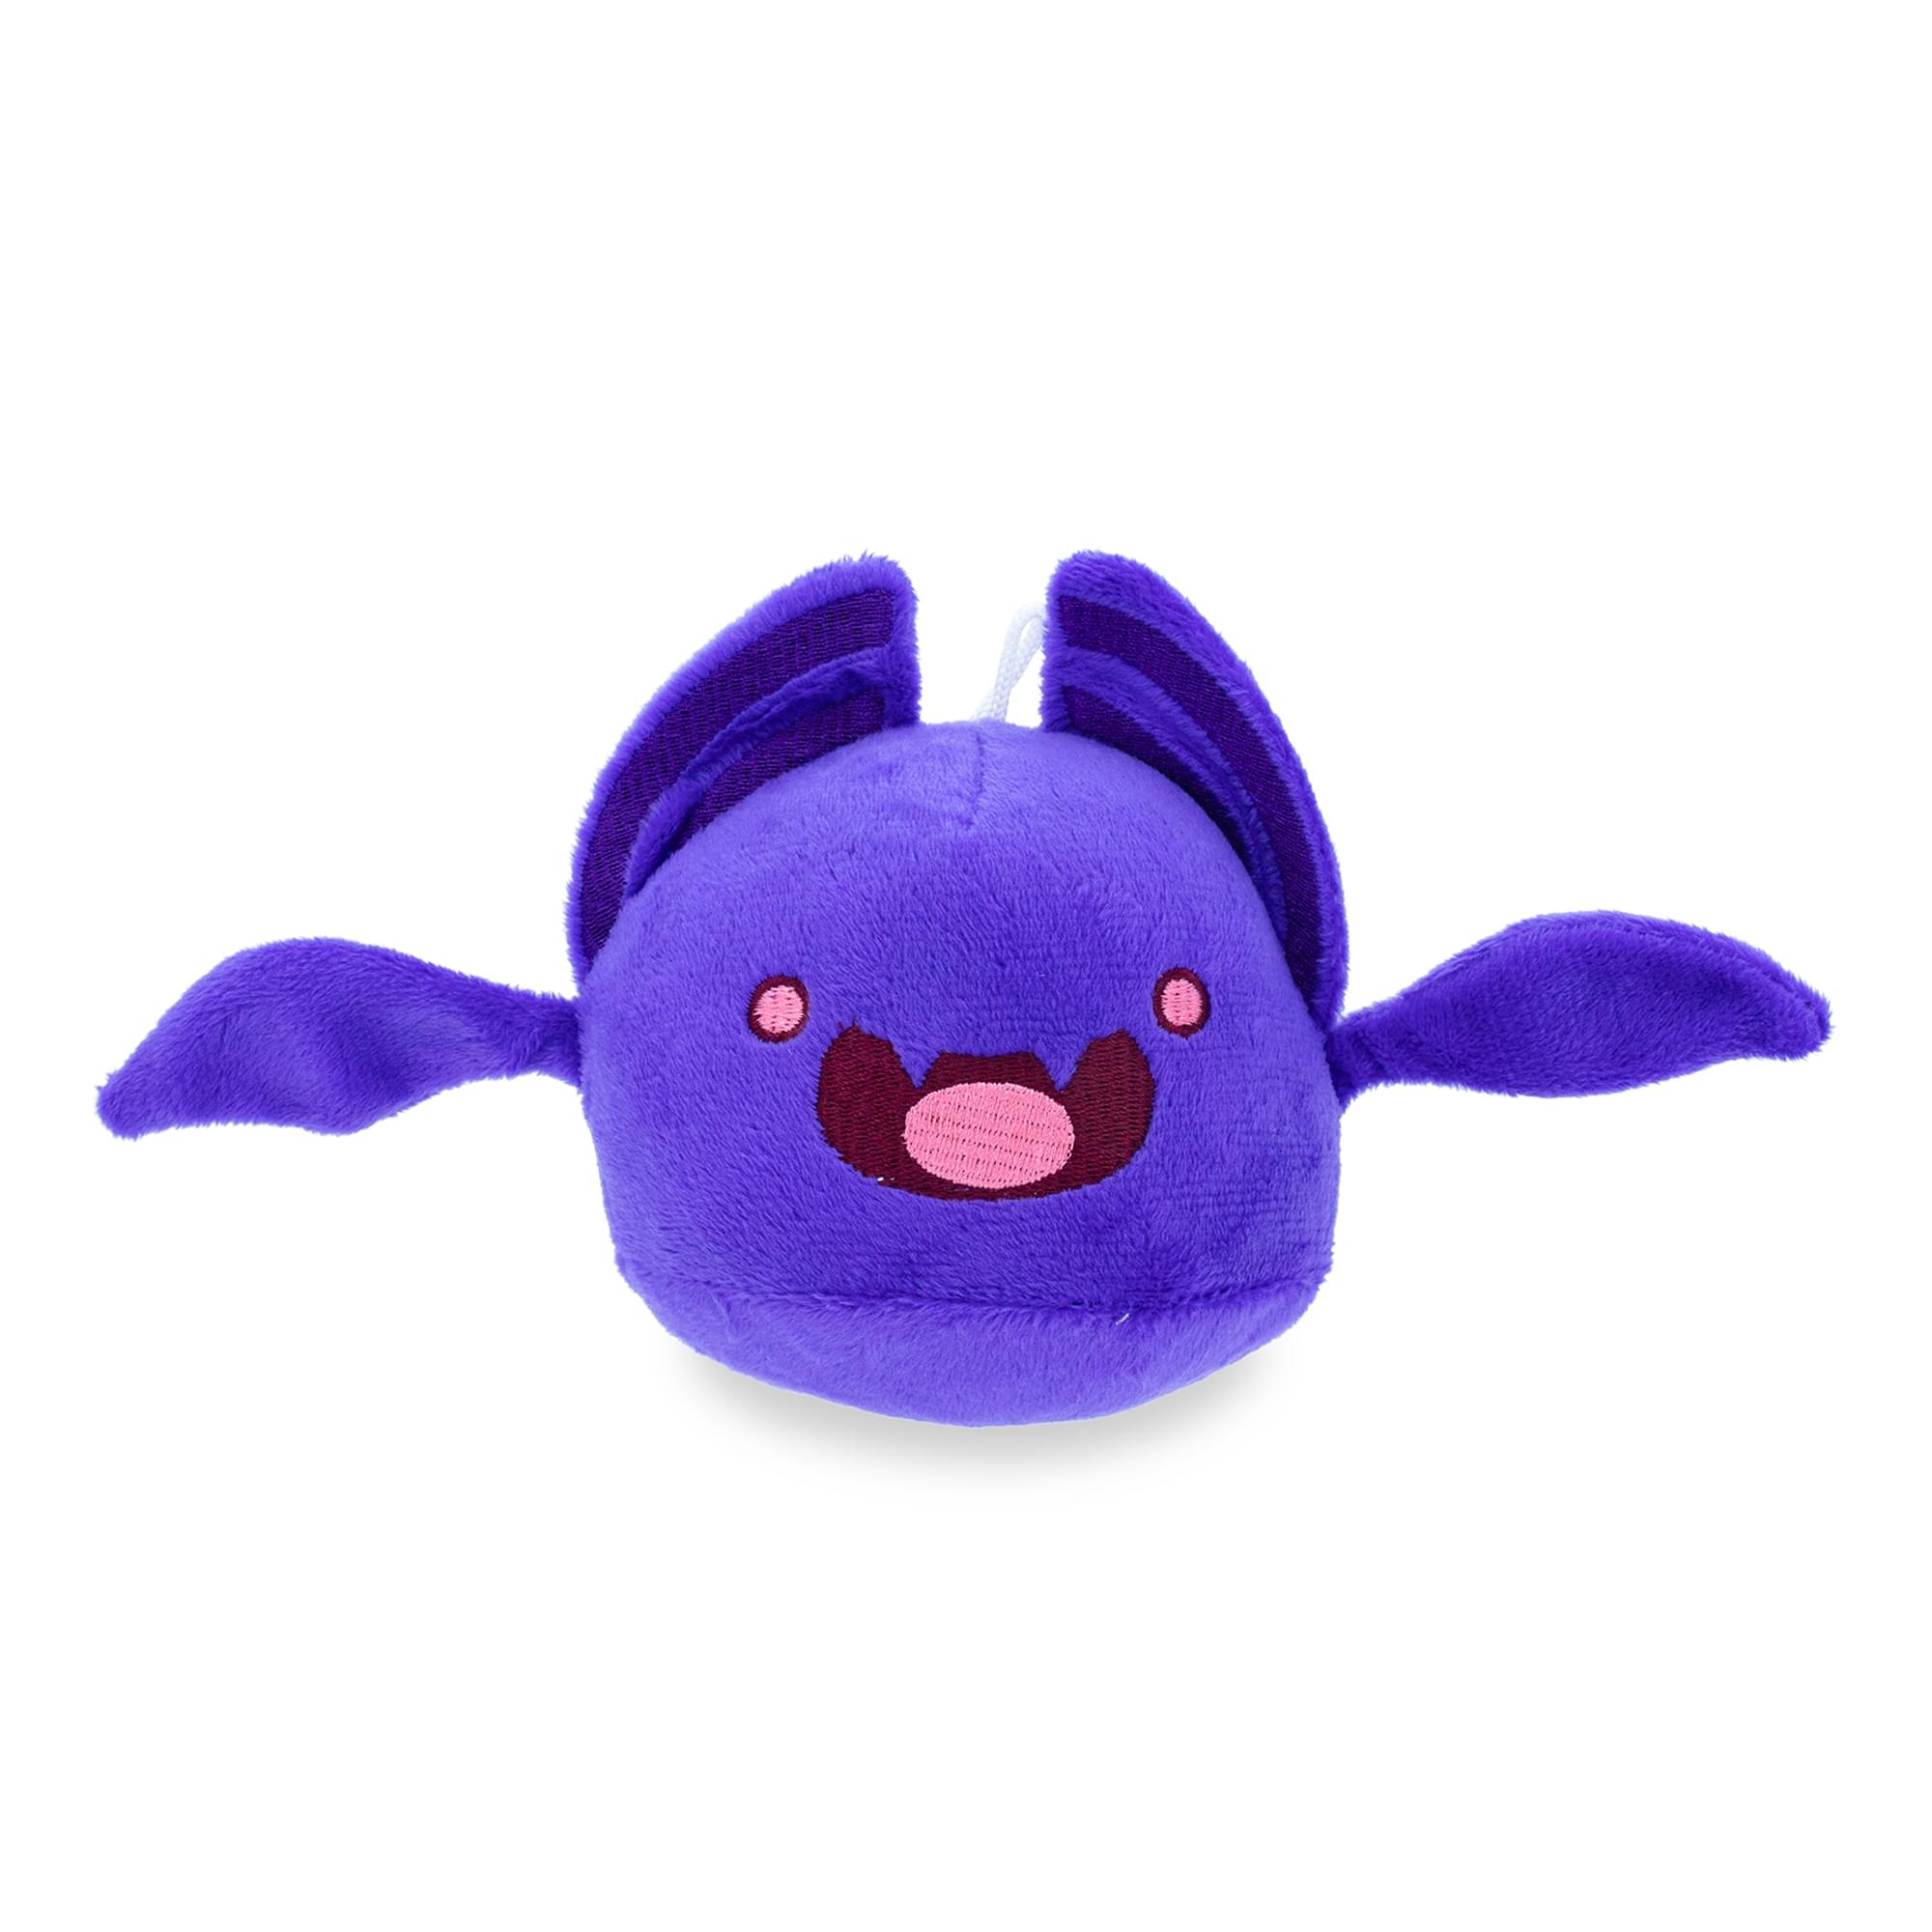 Slime Rancher 4 Collector Plush Toy , Batty Slime